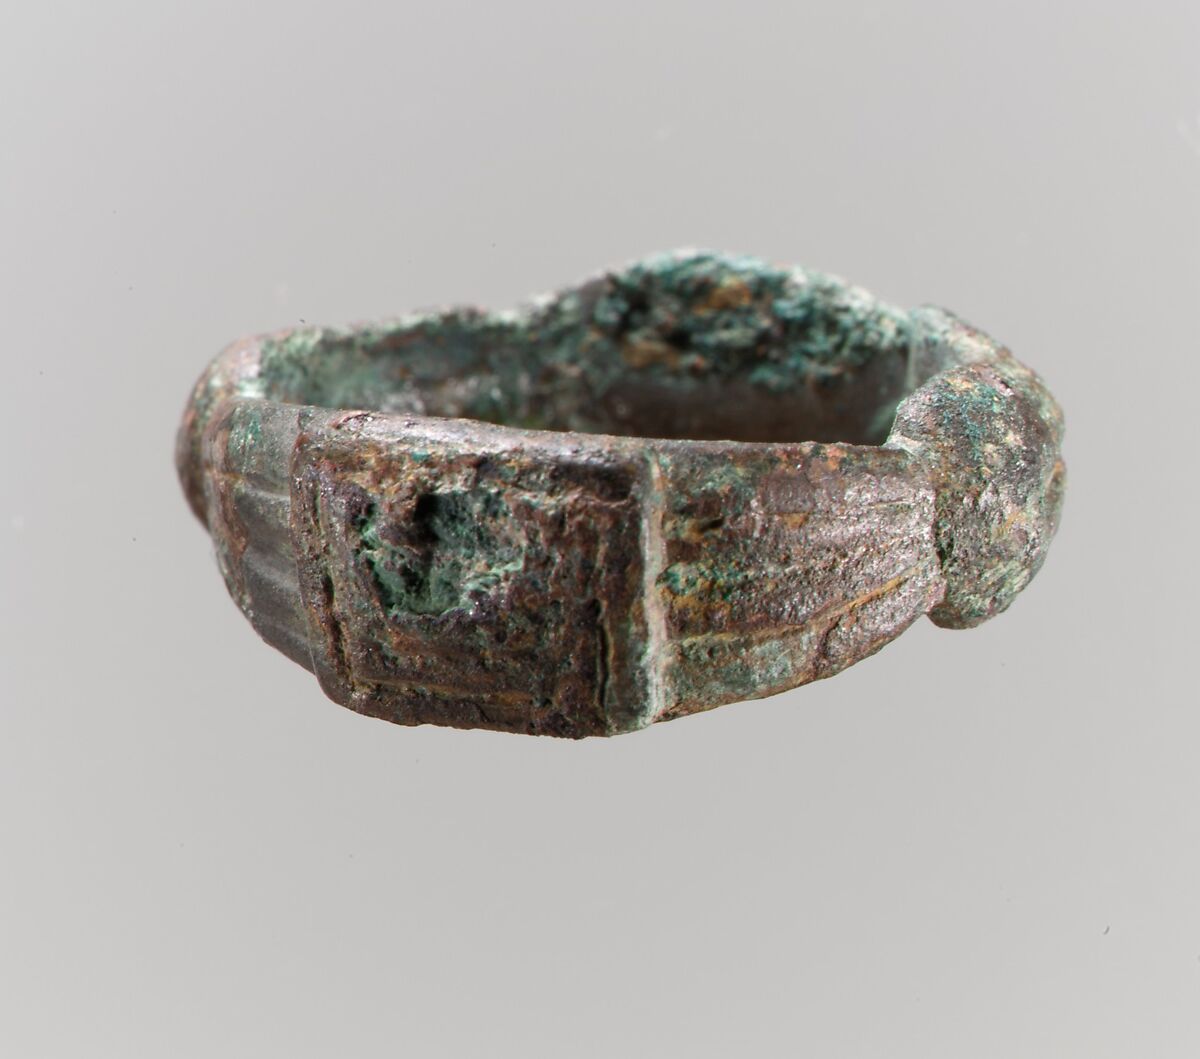 Finger Ring, Copper alloy, cast, "tinned" surface, Frankish 